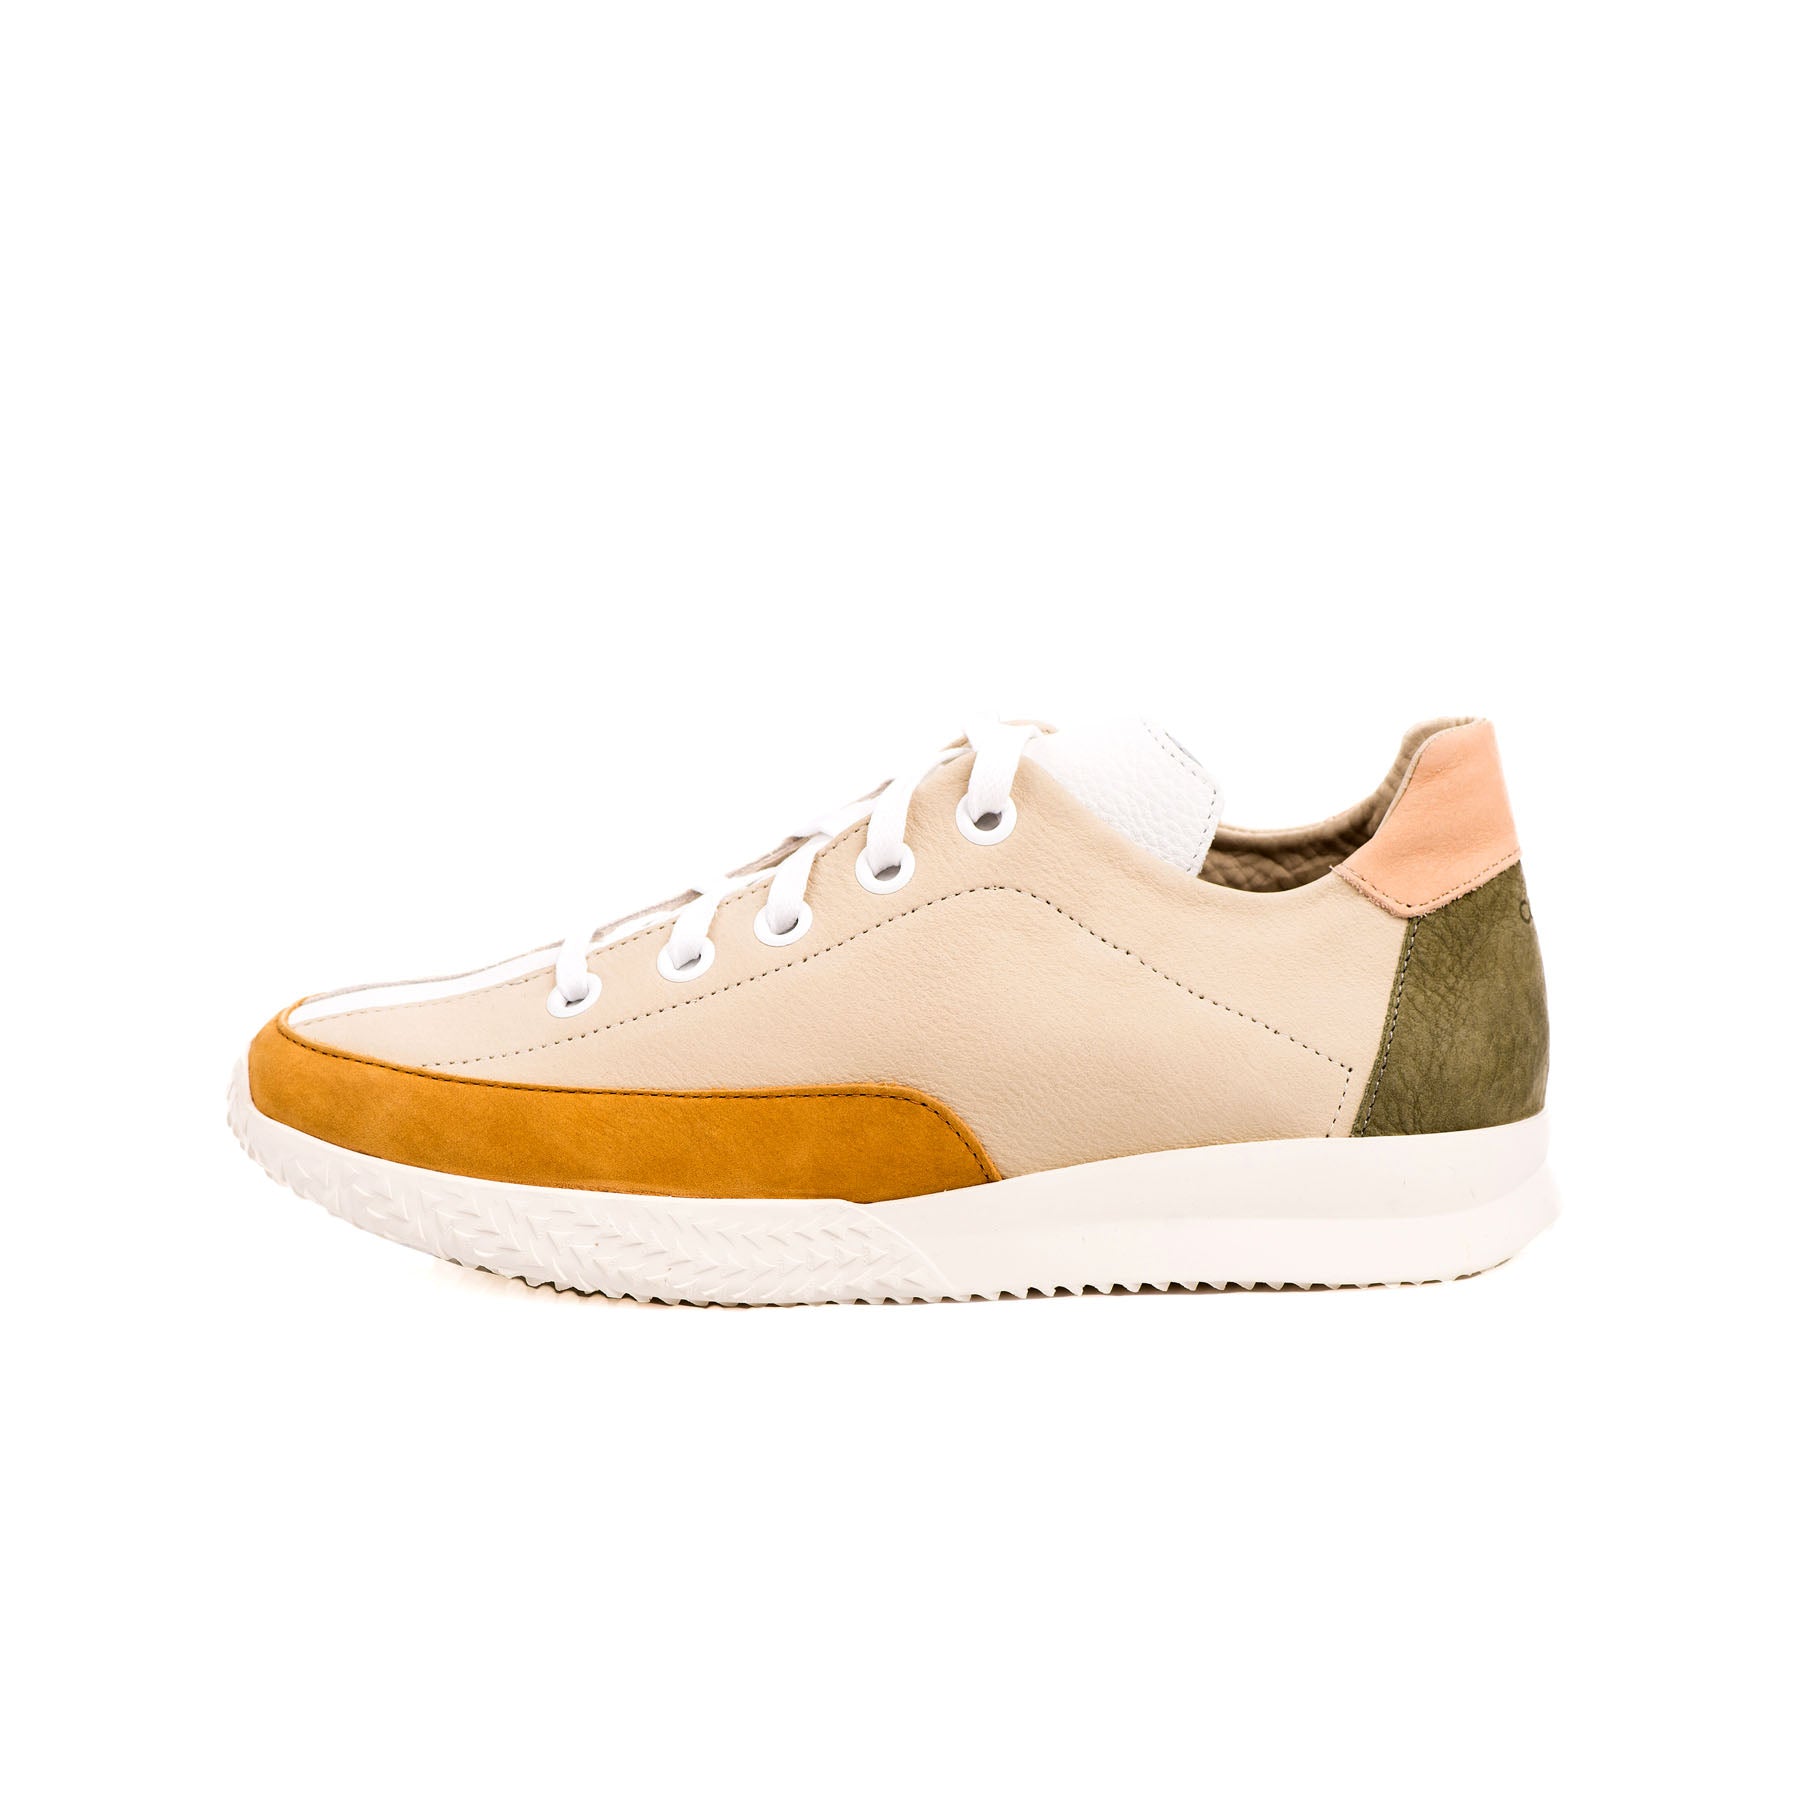 Arche Sneakers Andhye - Camel / Faience / Ecume - Chic & Simple